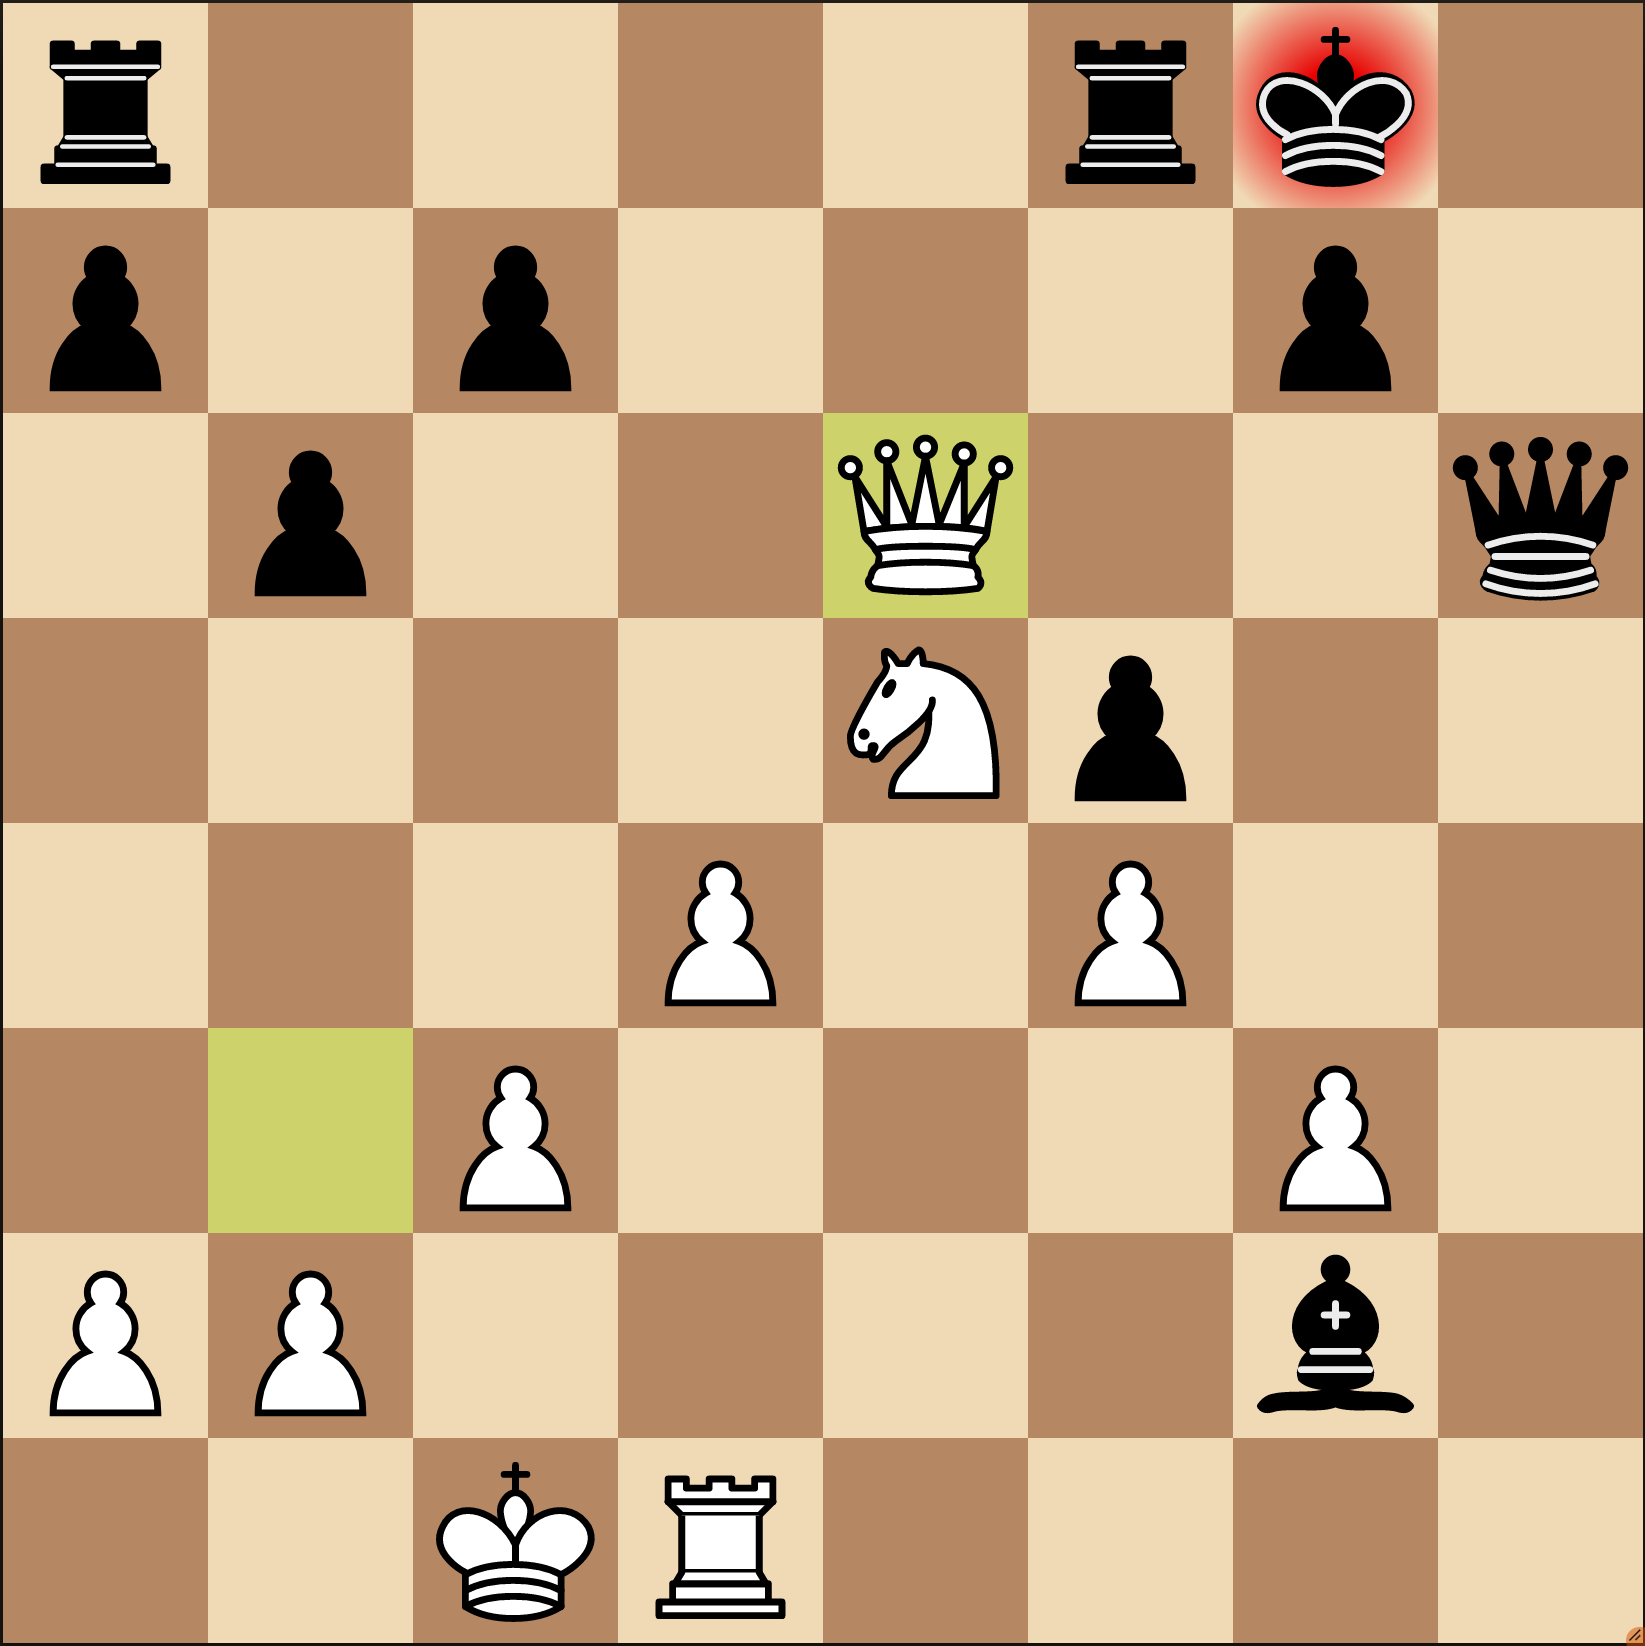 Did a self-analysis on a game with a of chess.com's bots. And Stockfish is  trying to cheat! : r/chess